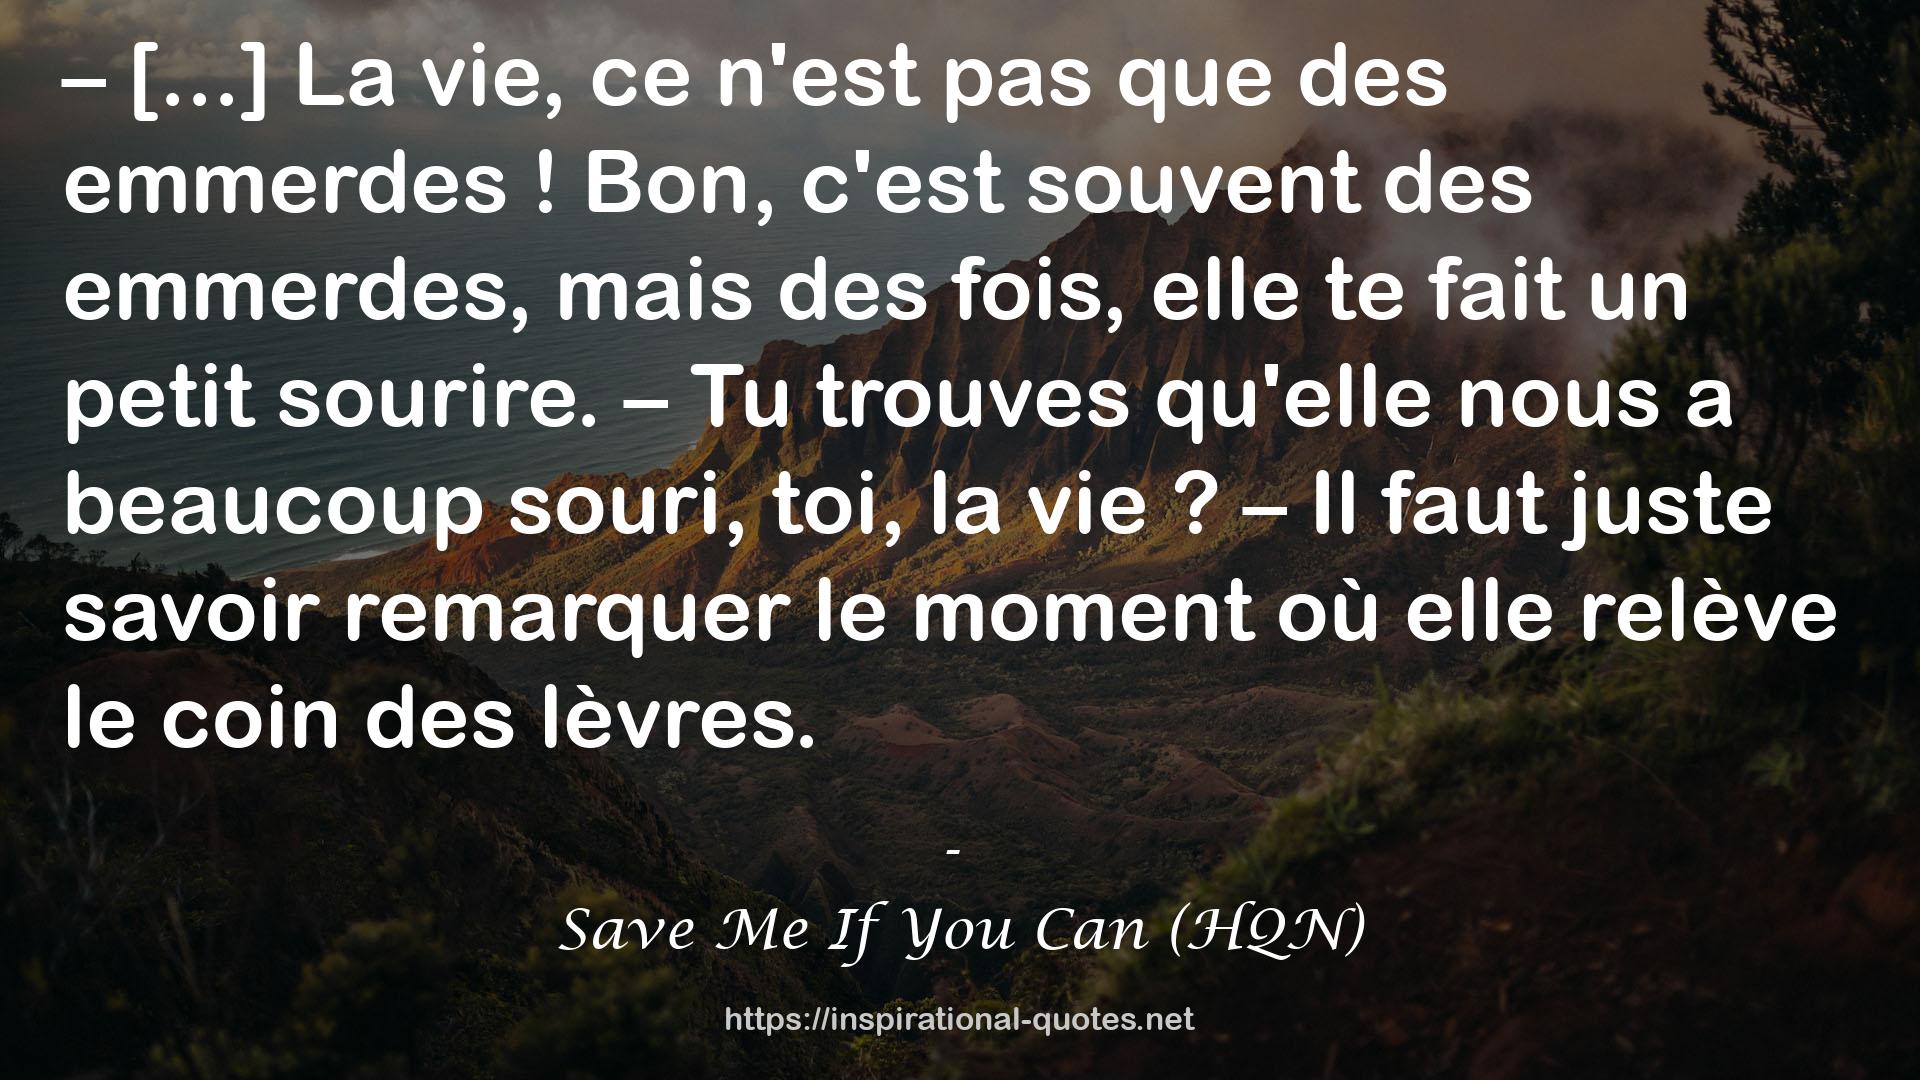 Save Me If You Can (HQN) QUOTES